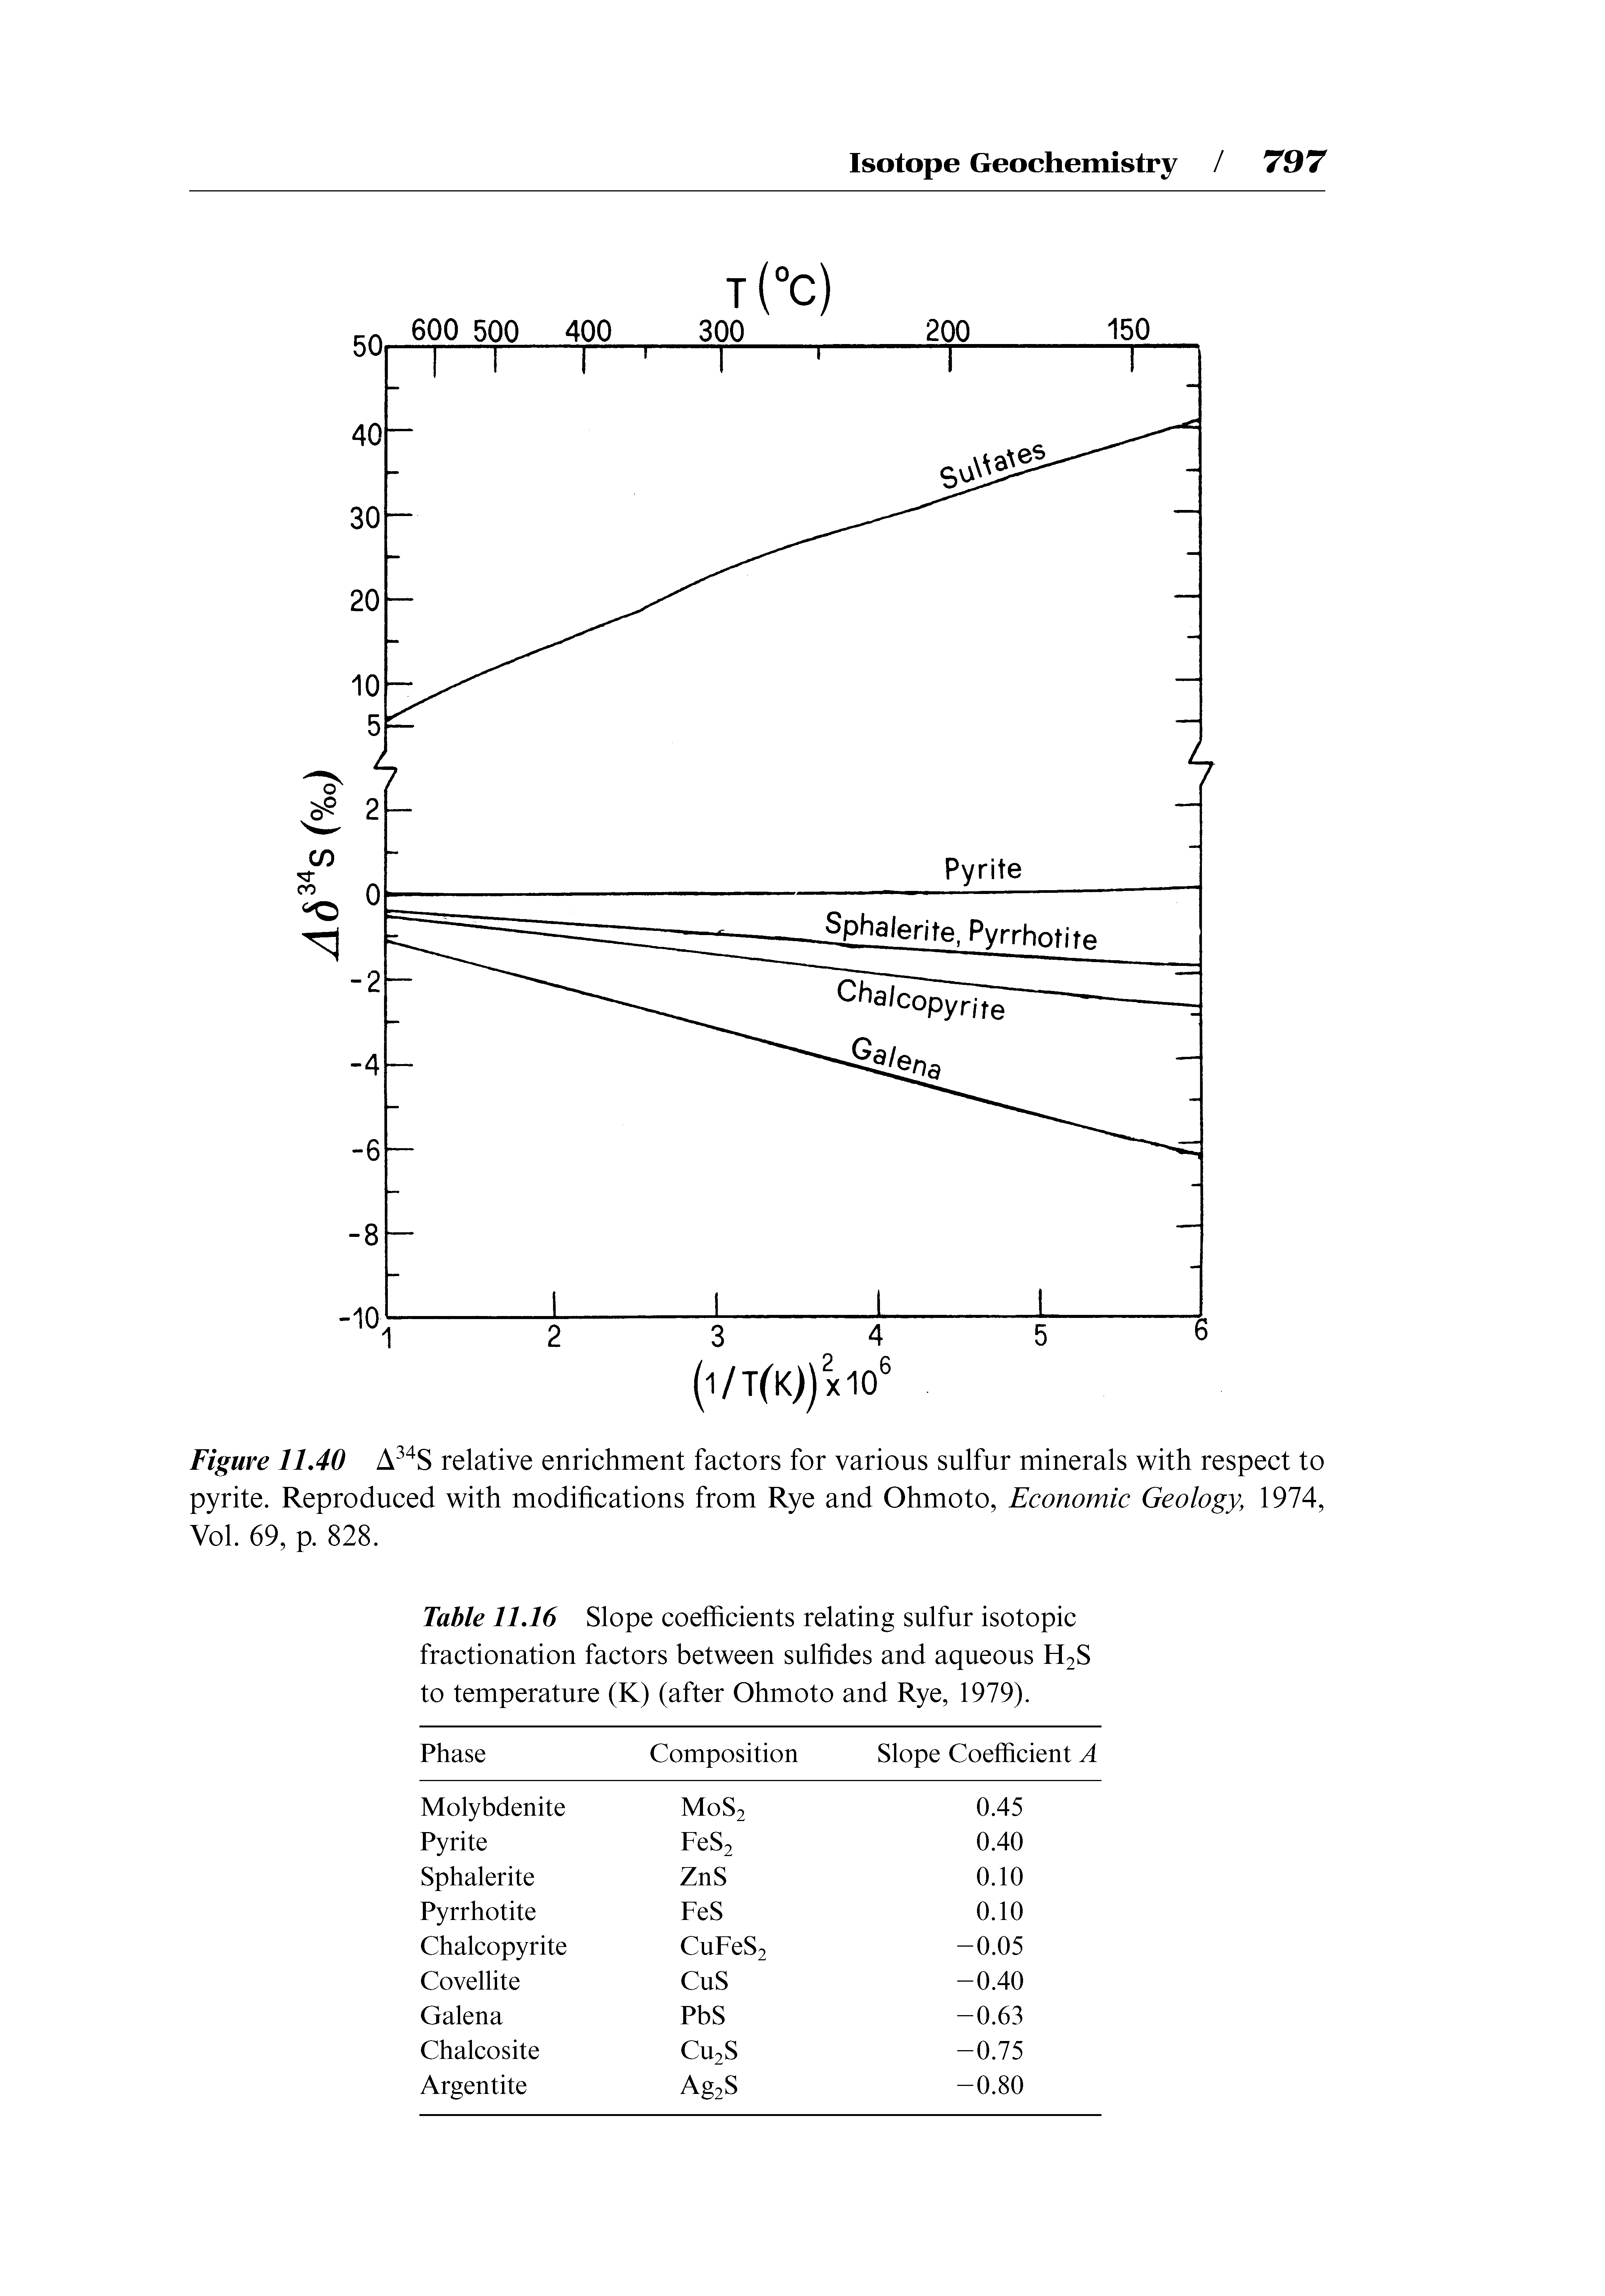 Table 11.16 Slope coefficients relating sulfur isotopic fractionation factors between sulfides and aqueous H2S to temperature (K) (after Ohmoto and Rye, 1979).